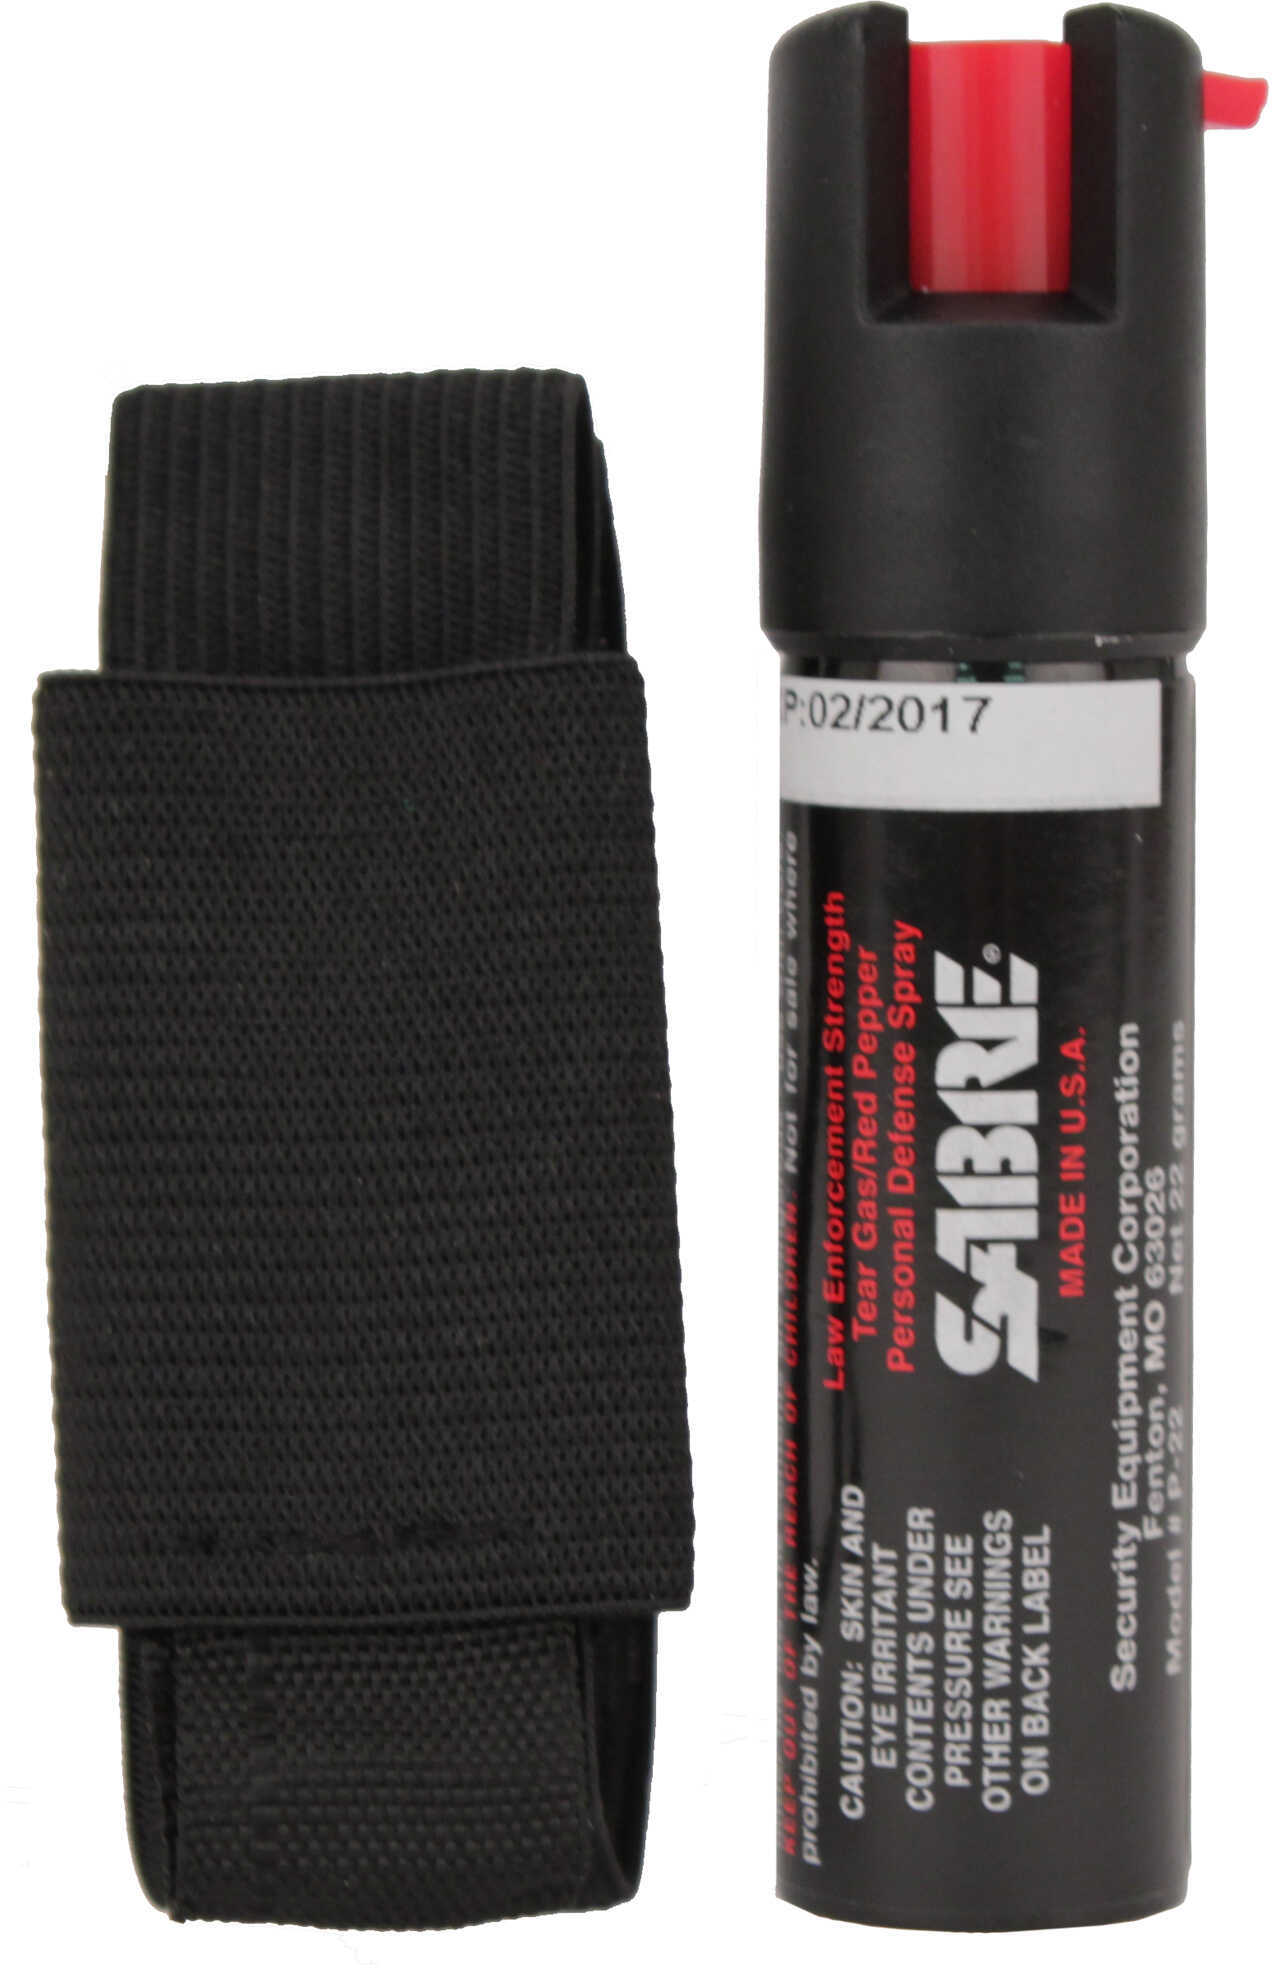 Sabre 3-in-1 Runners Pepper Spray Black with Adjustable Hand Strap Model: P-22J